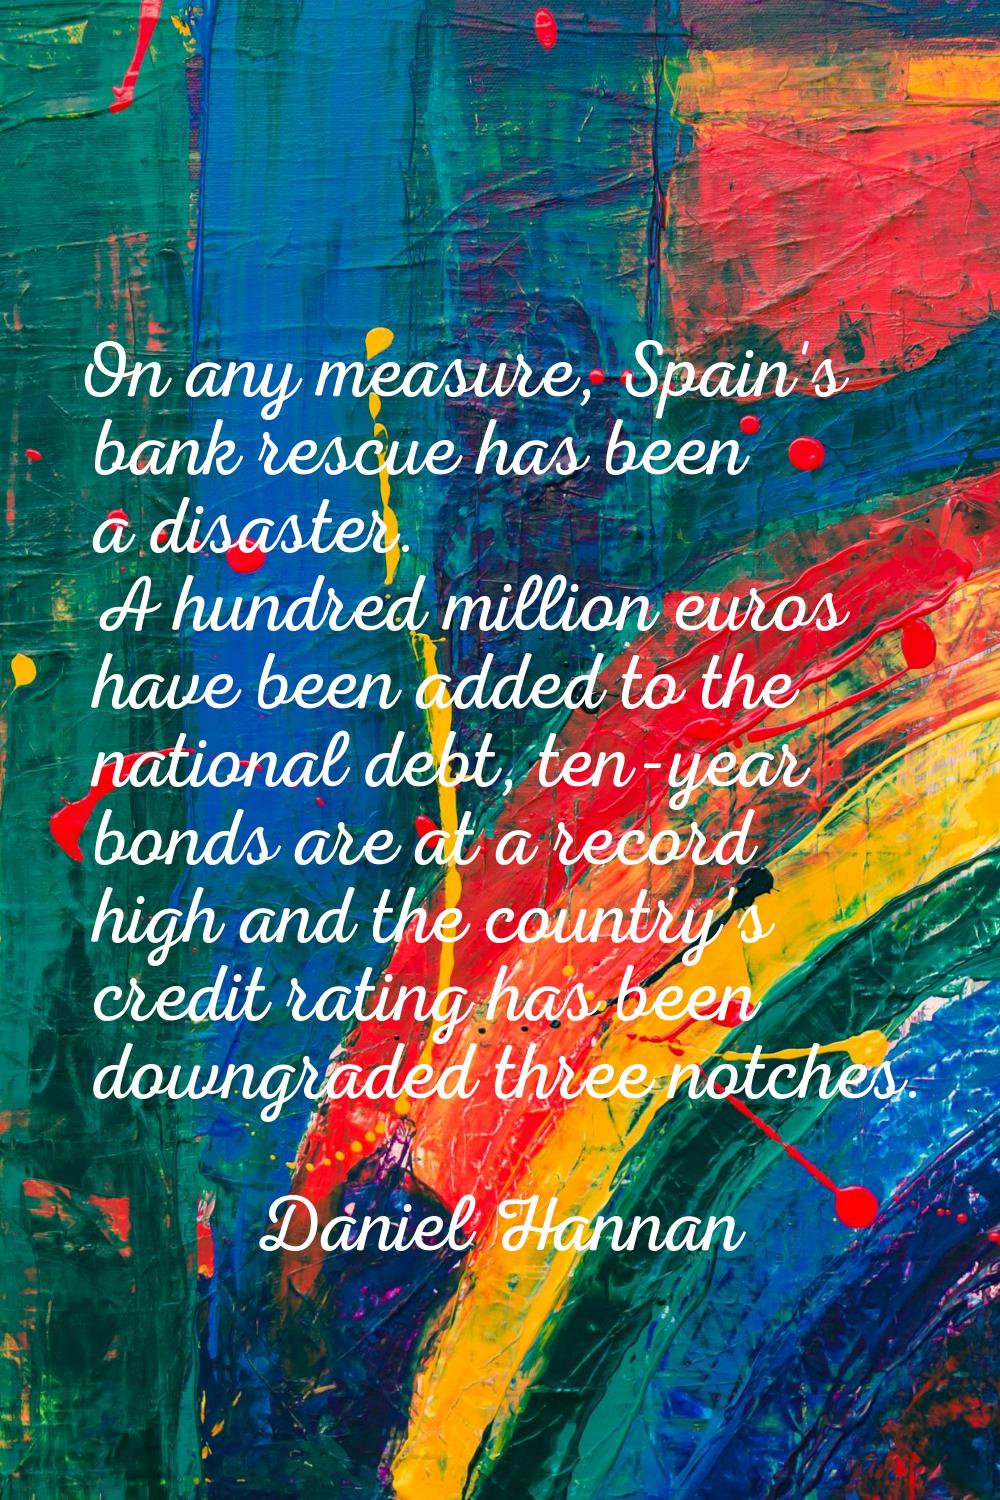 On any measure, Spain's bank rescue has been a disaster. A hundred million euros have been added to